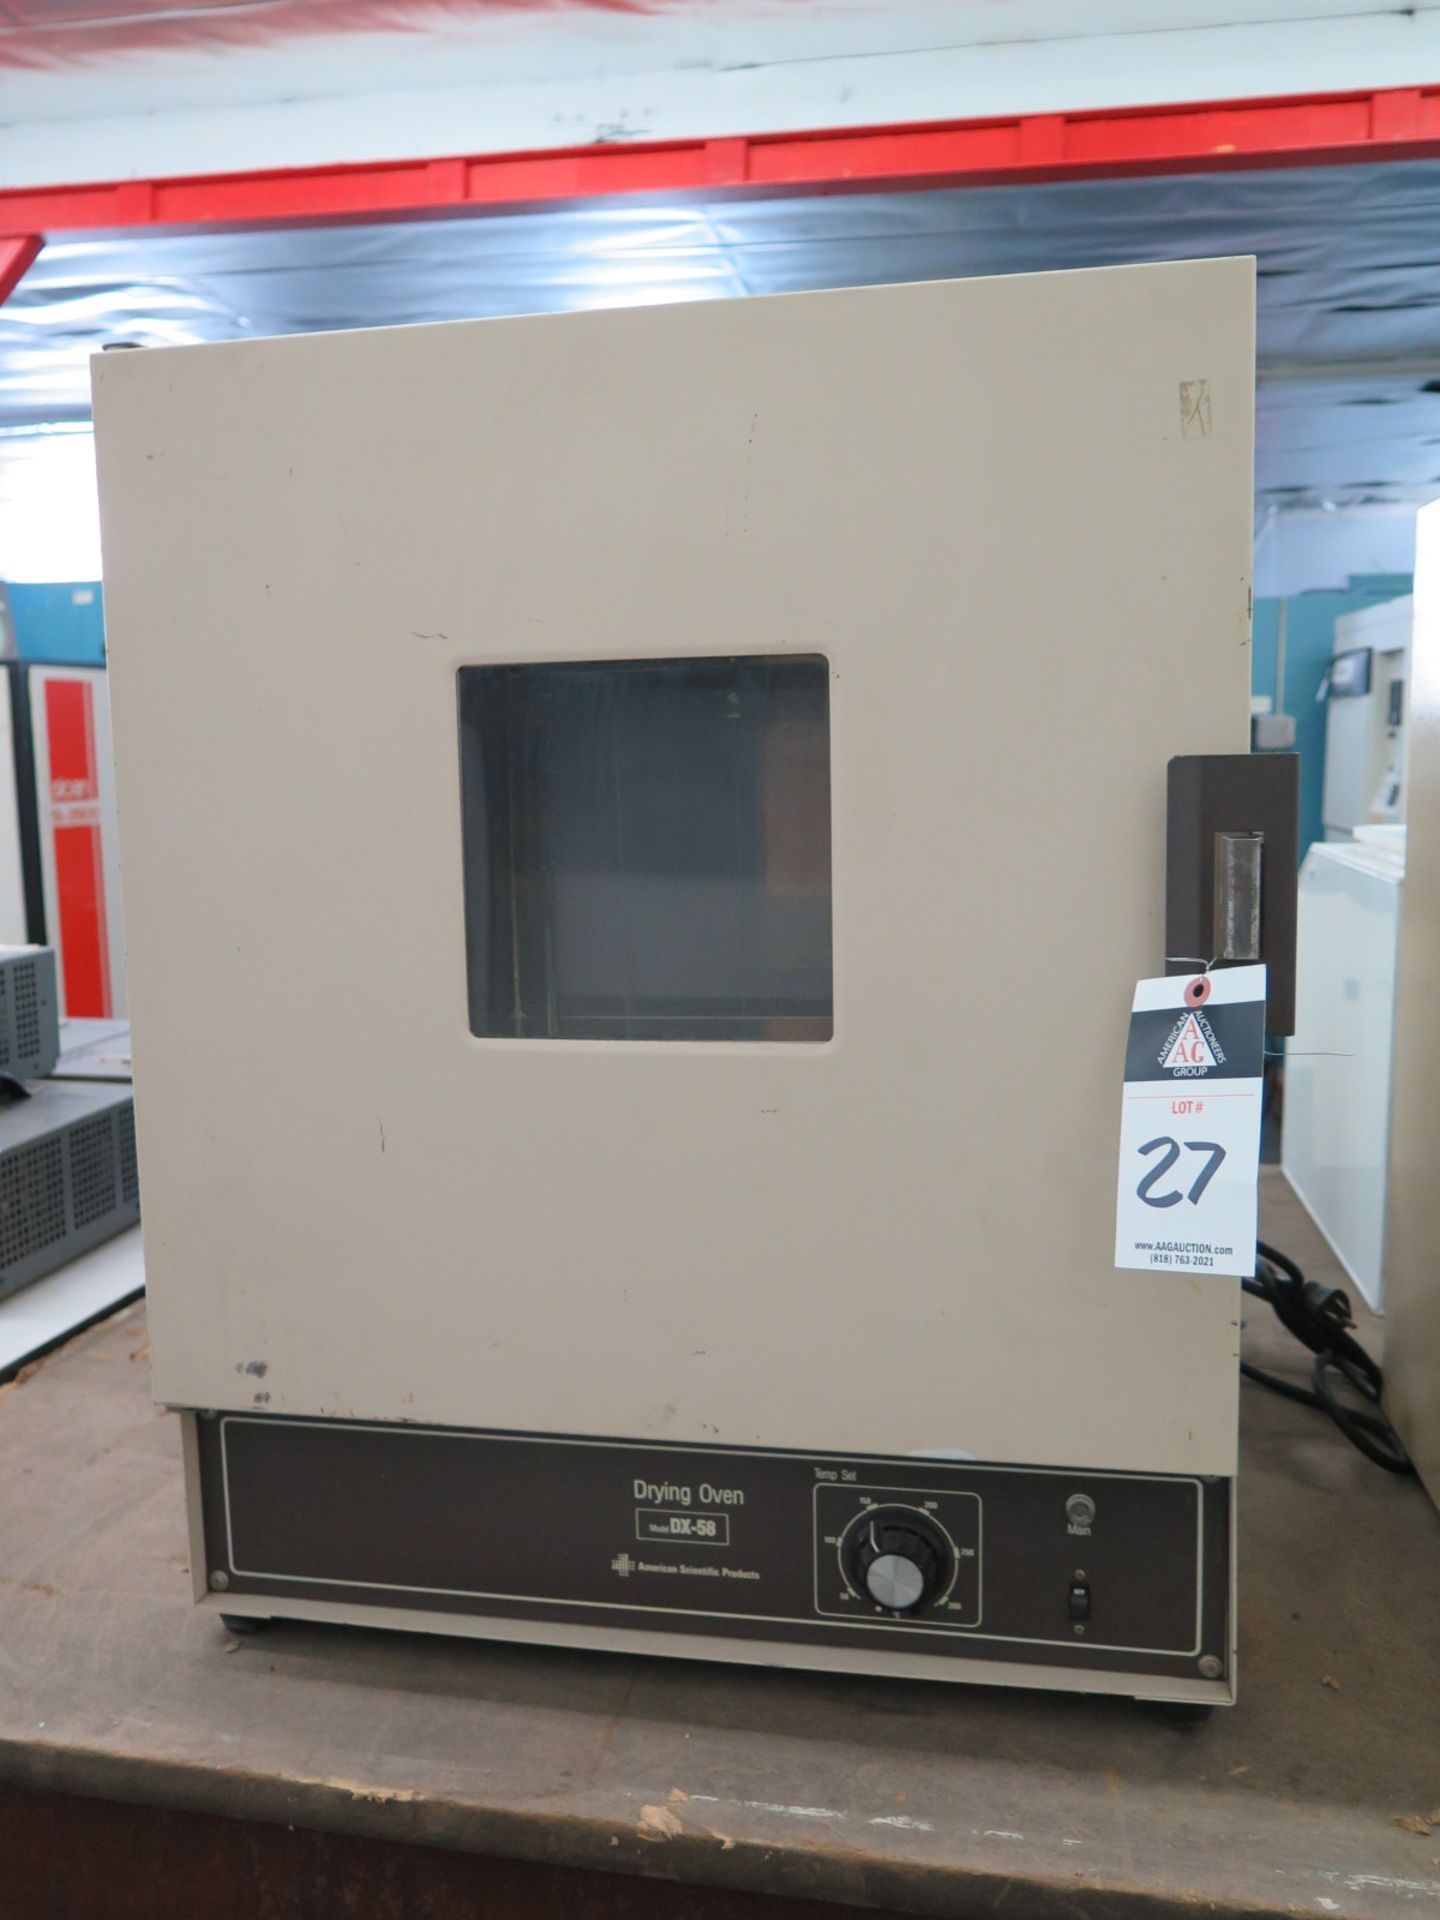 American Scientific mdl. DX-58 Drying Oven